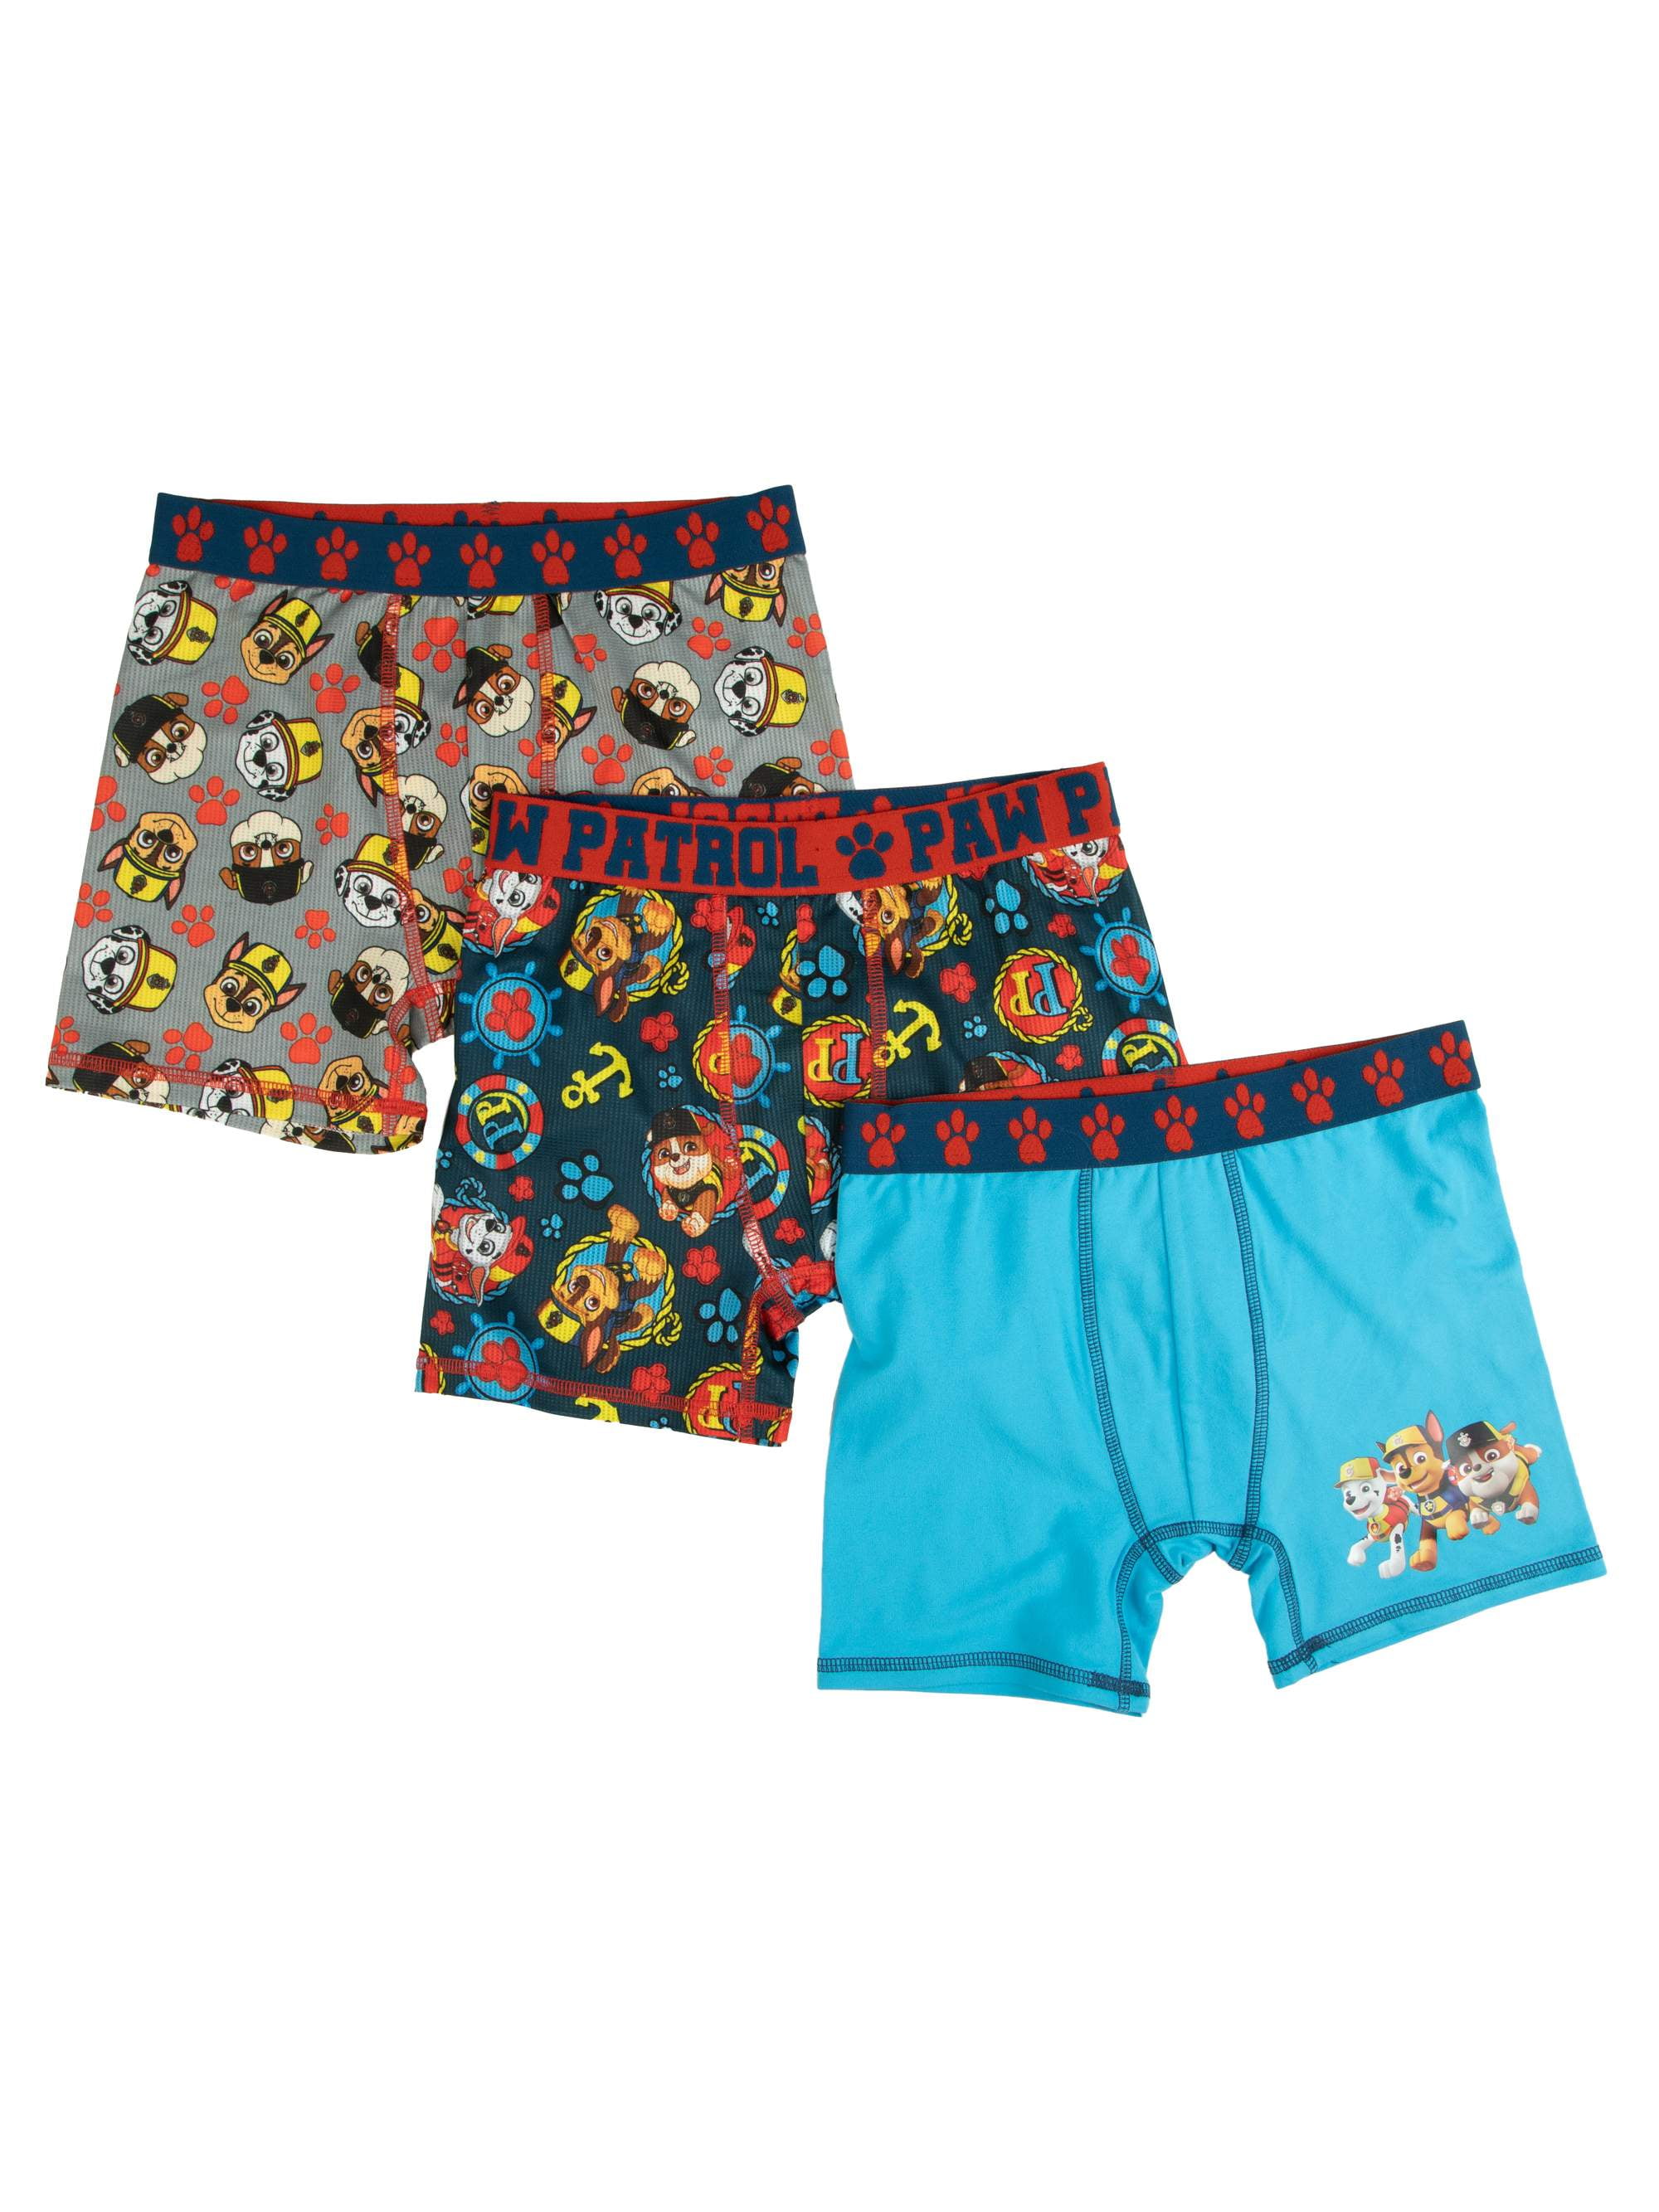 Details about   Boys Five Nights At Freddy's Black 3PC Athletic Boxer Briefs Underoos Underwear 